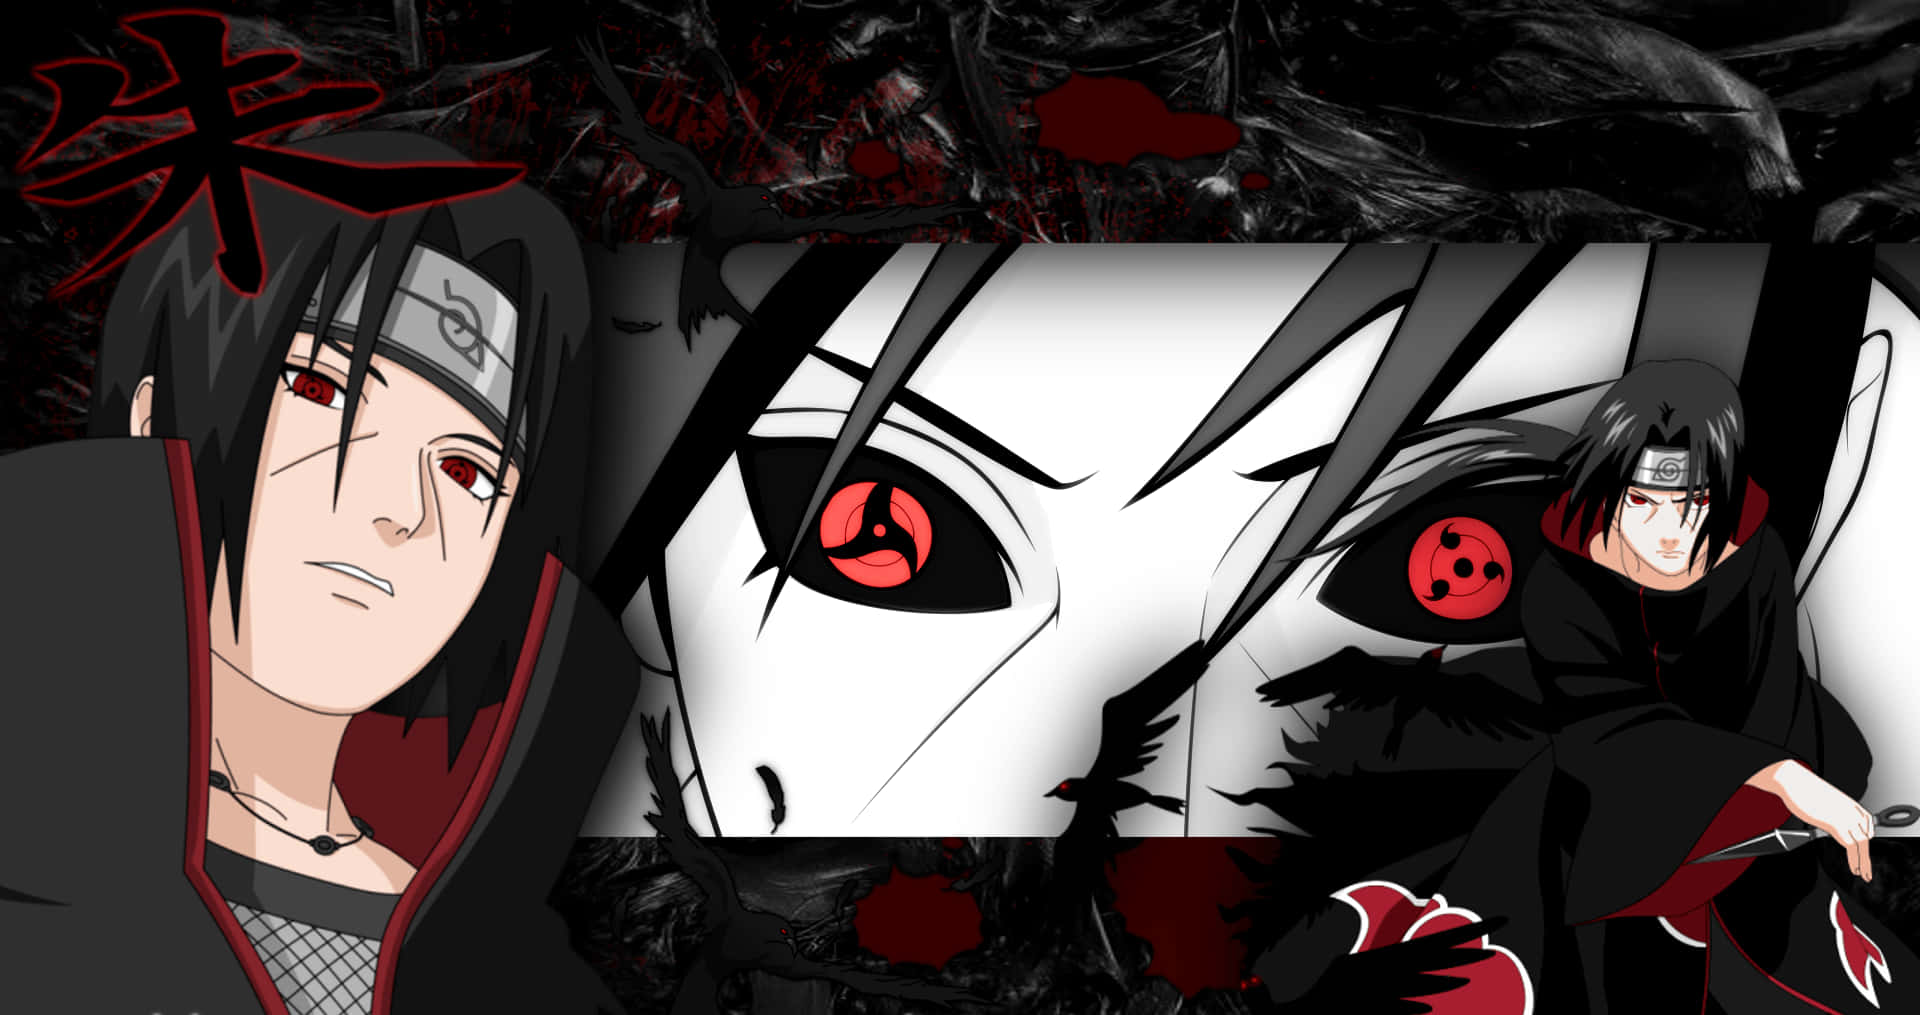 Close Up View Of Itachi Aesthetic Sharingan Eyes With Black Crows Background